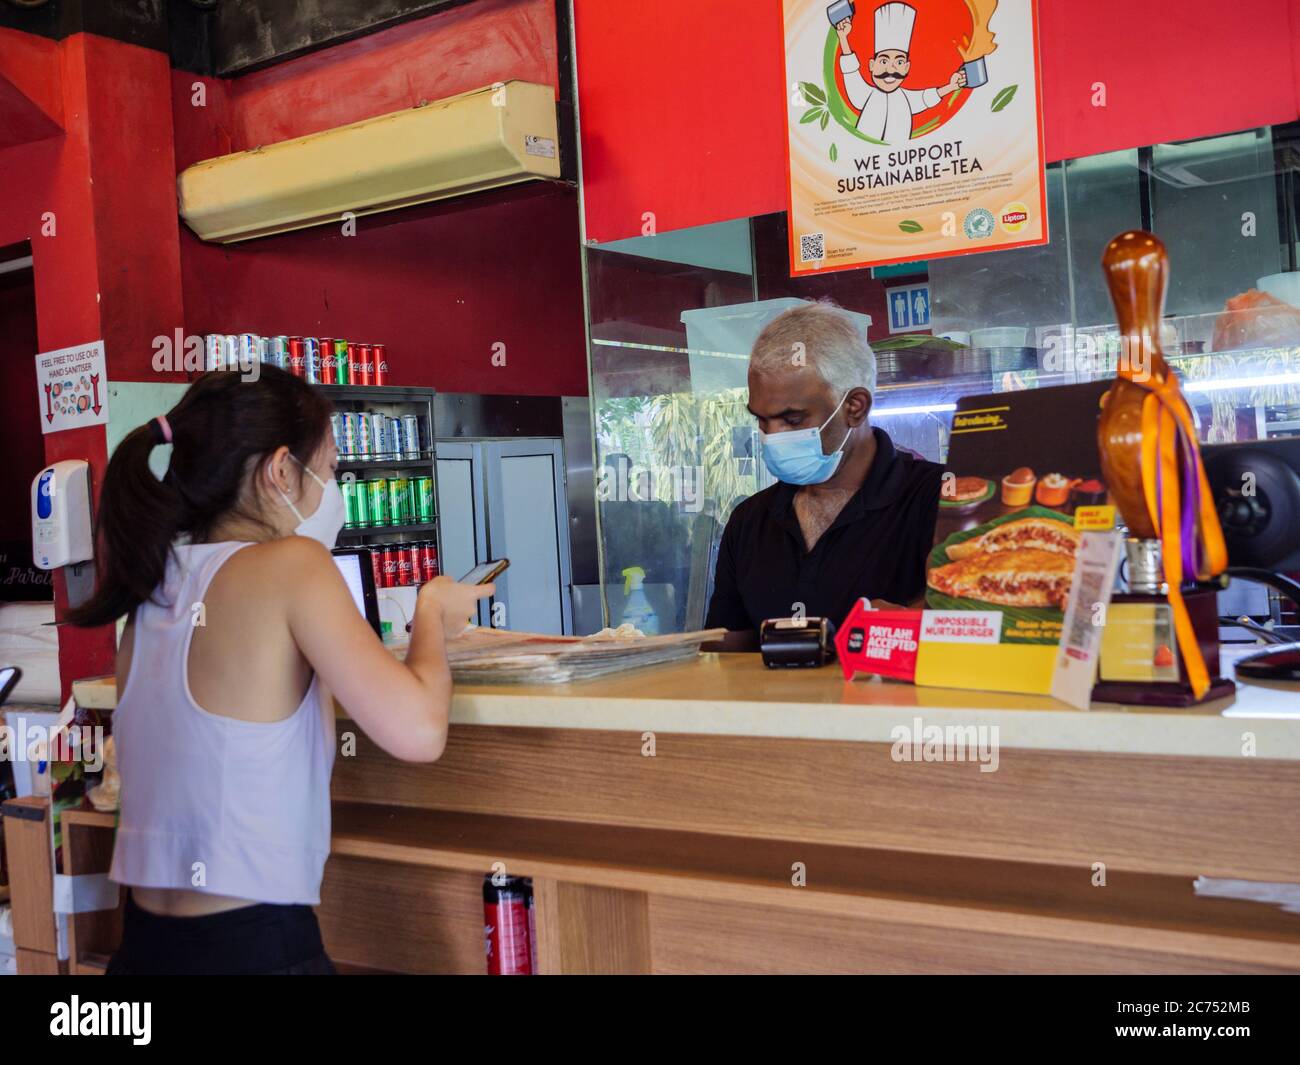 SINGAPORE – JULY 10 2020 – A customer at the Springleaf Prata Place Indian restaurant in Singapore wears a protective mask and pays via mobile phone c Stock Photo